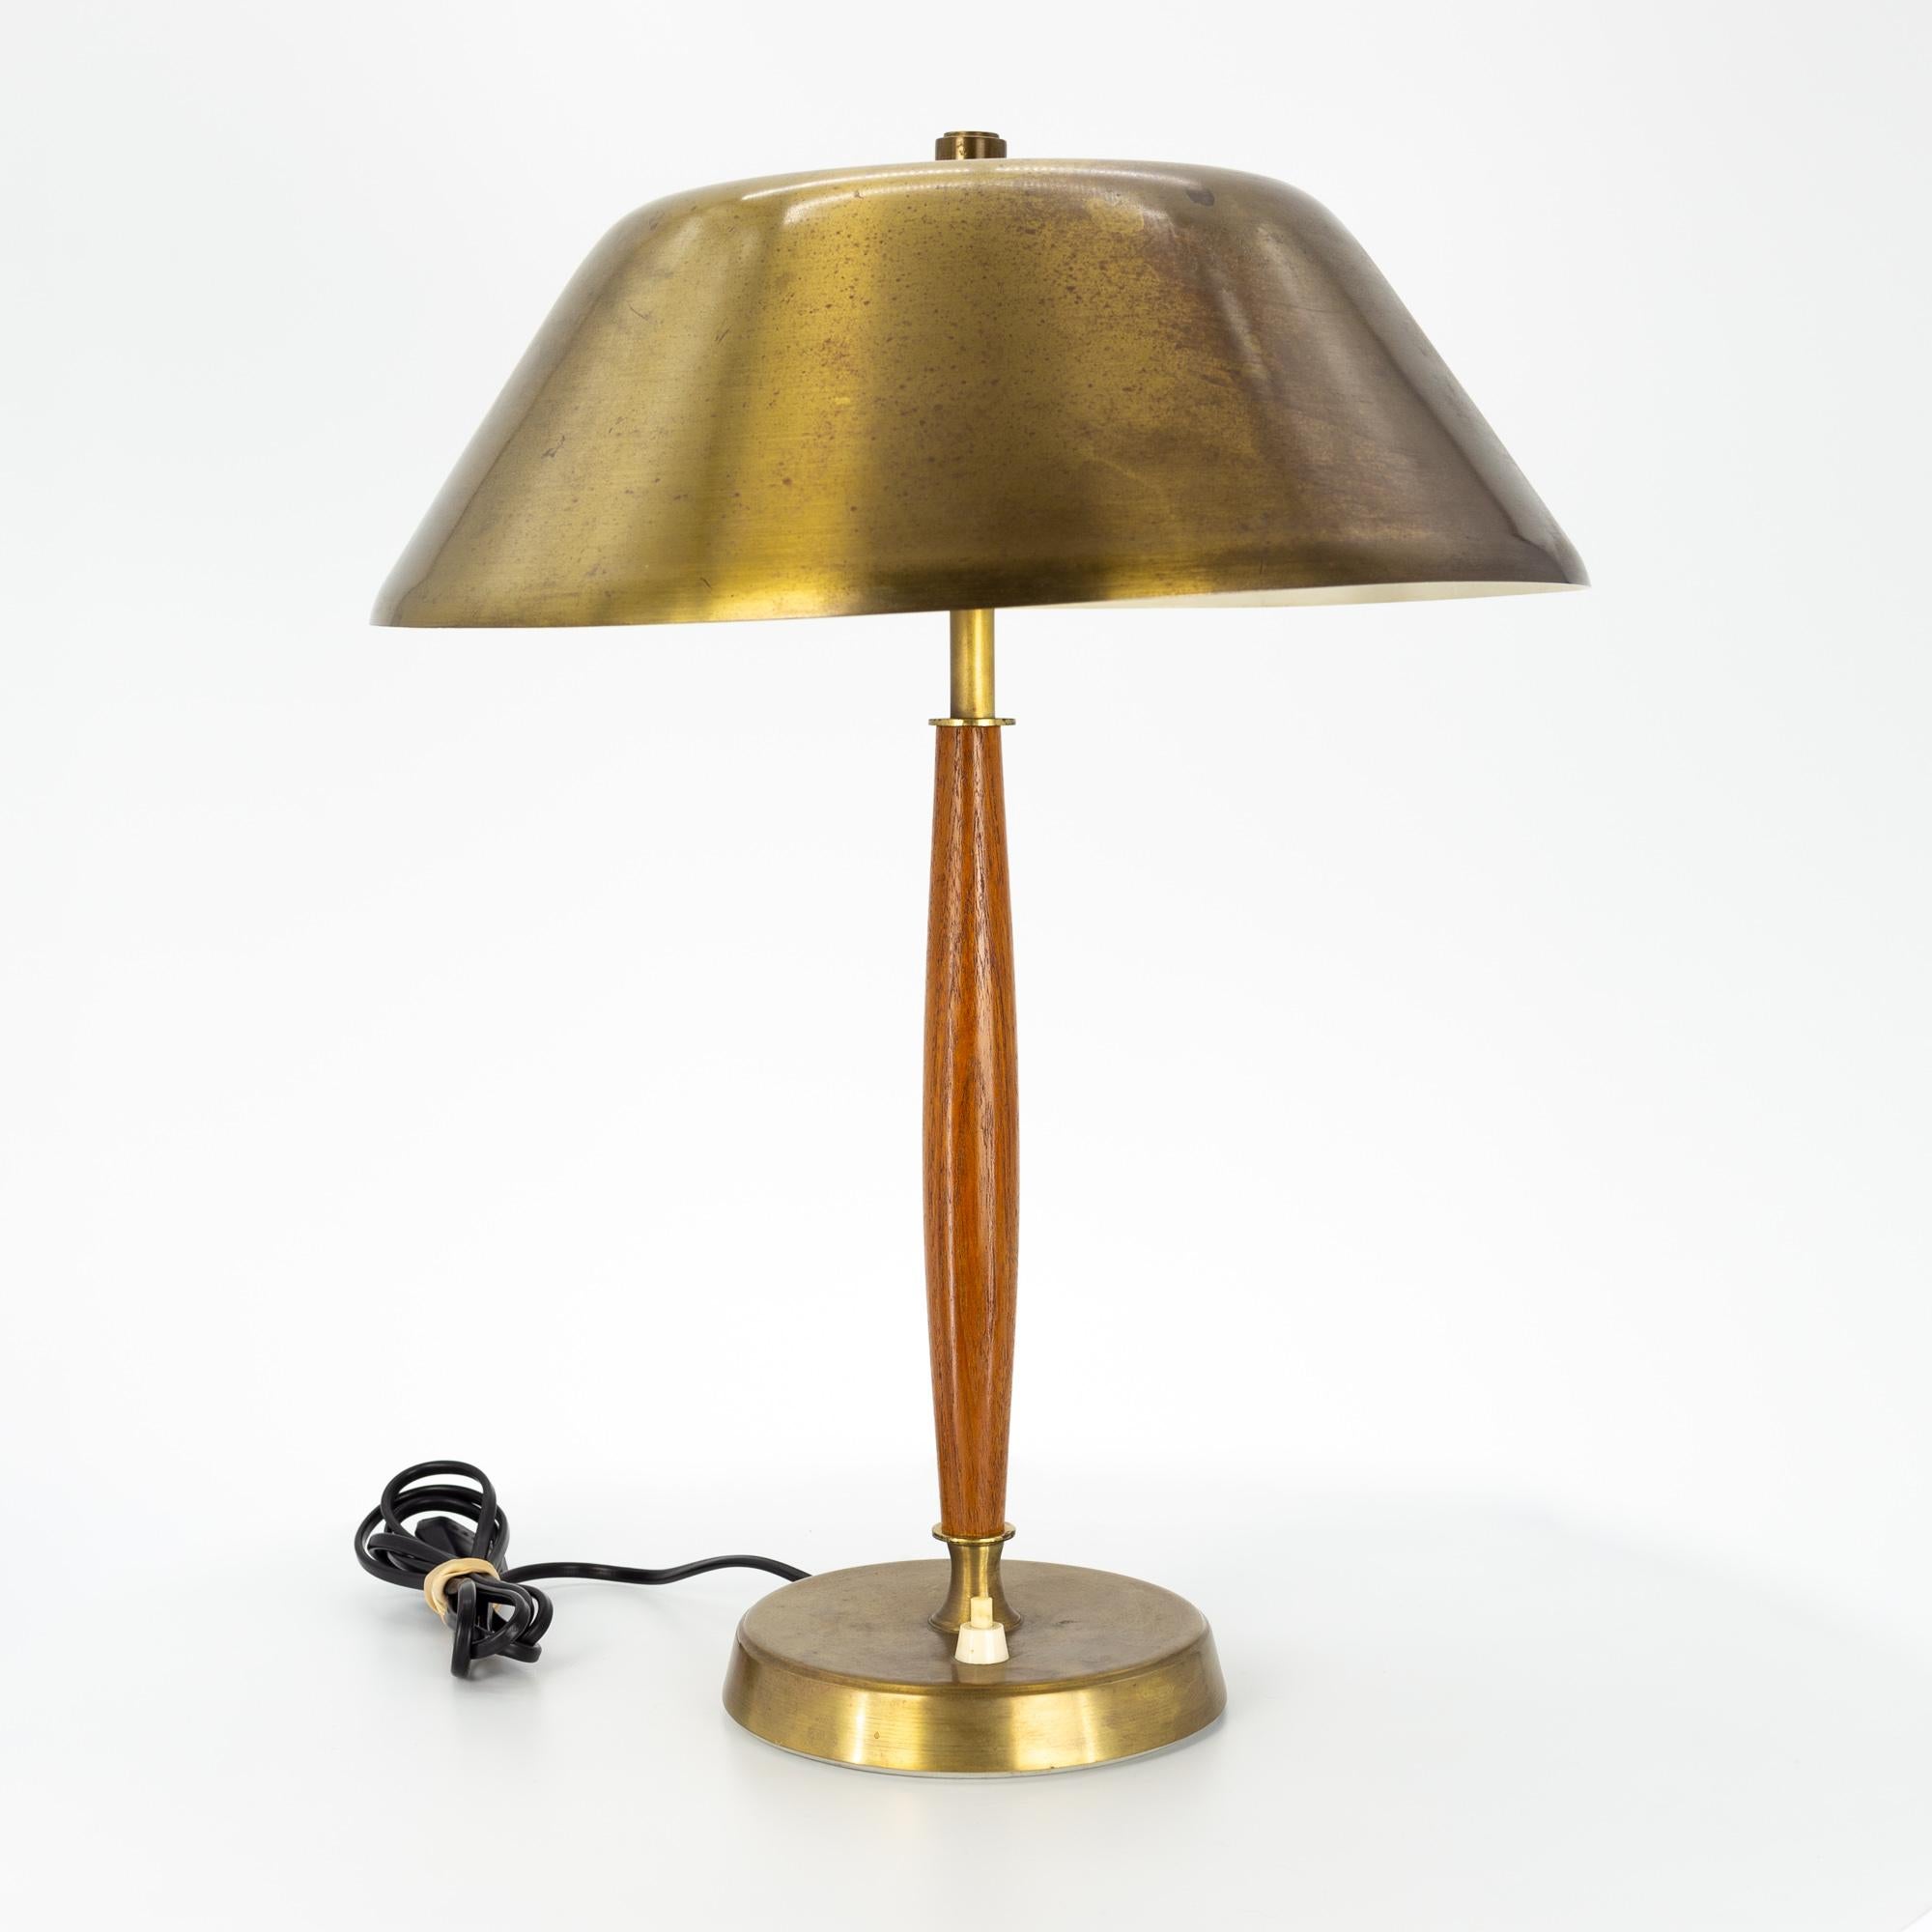 Falkenbergs Belysning mid century brass and walnut table lamp

This lamp measures: 13 wide x 13 deep x 18 inches high

This lamp is in Great Vintage Condition

We take our photos in a controlled lighting studio to show as much detail as